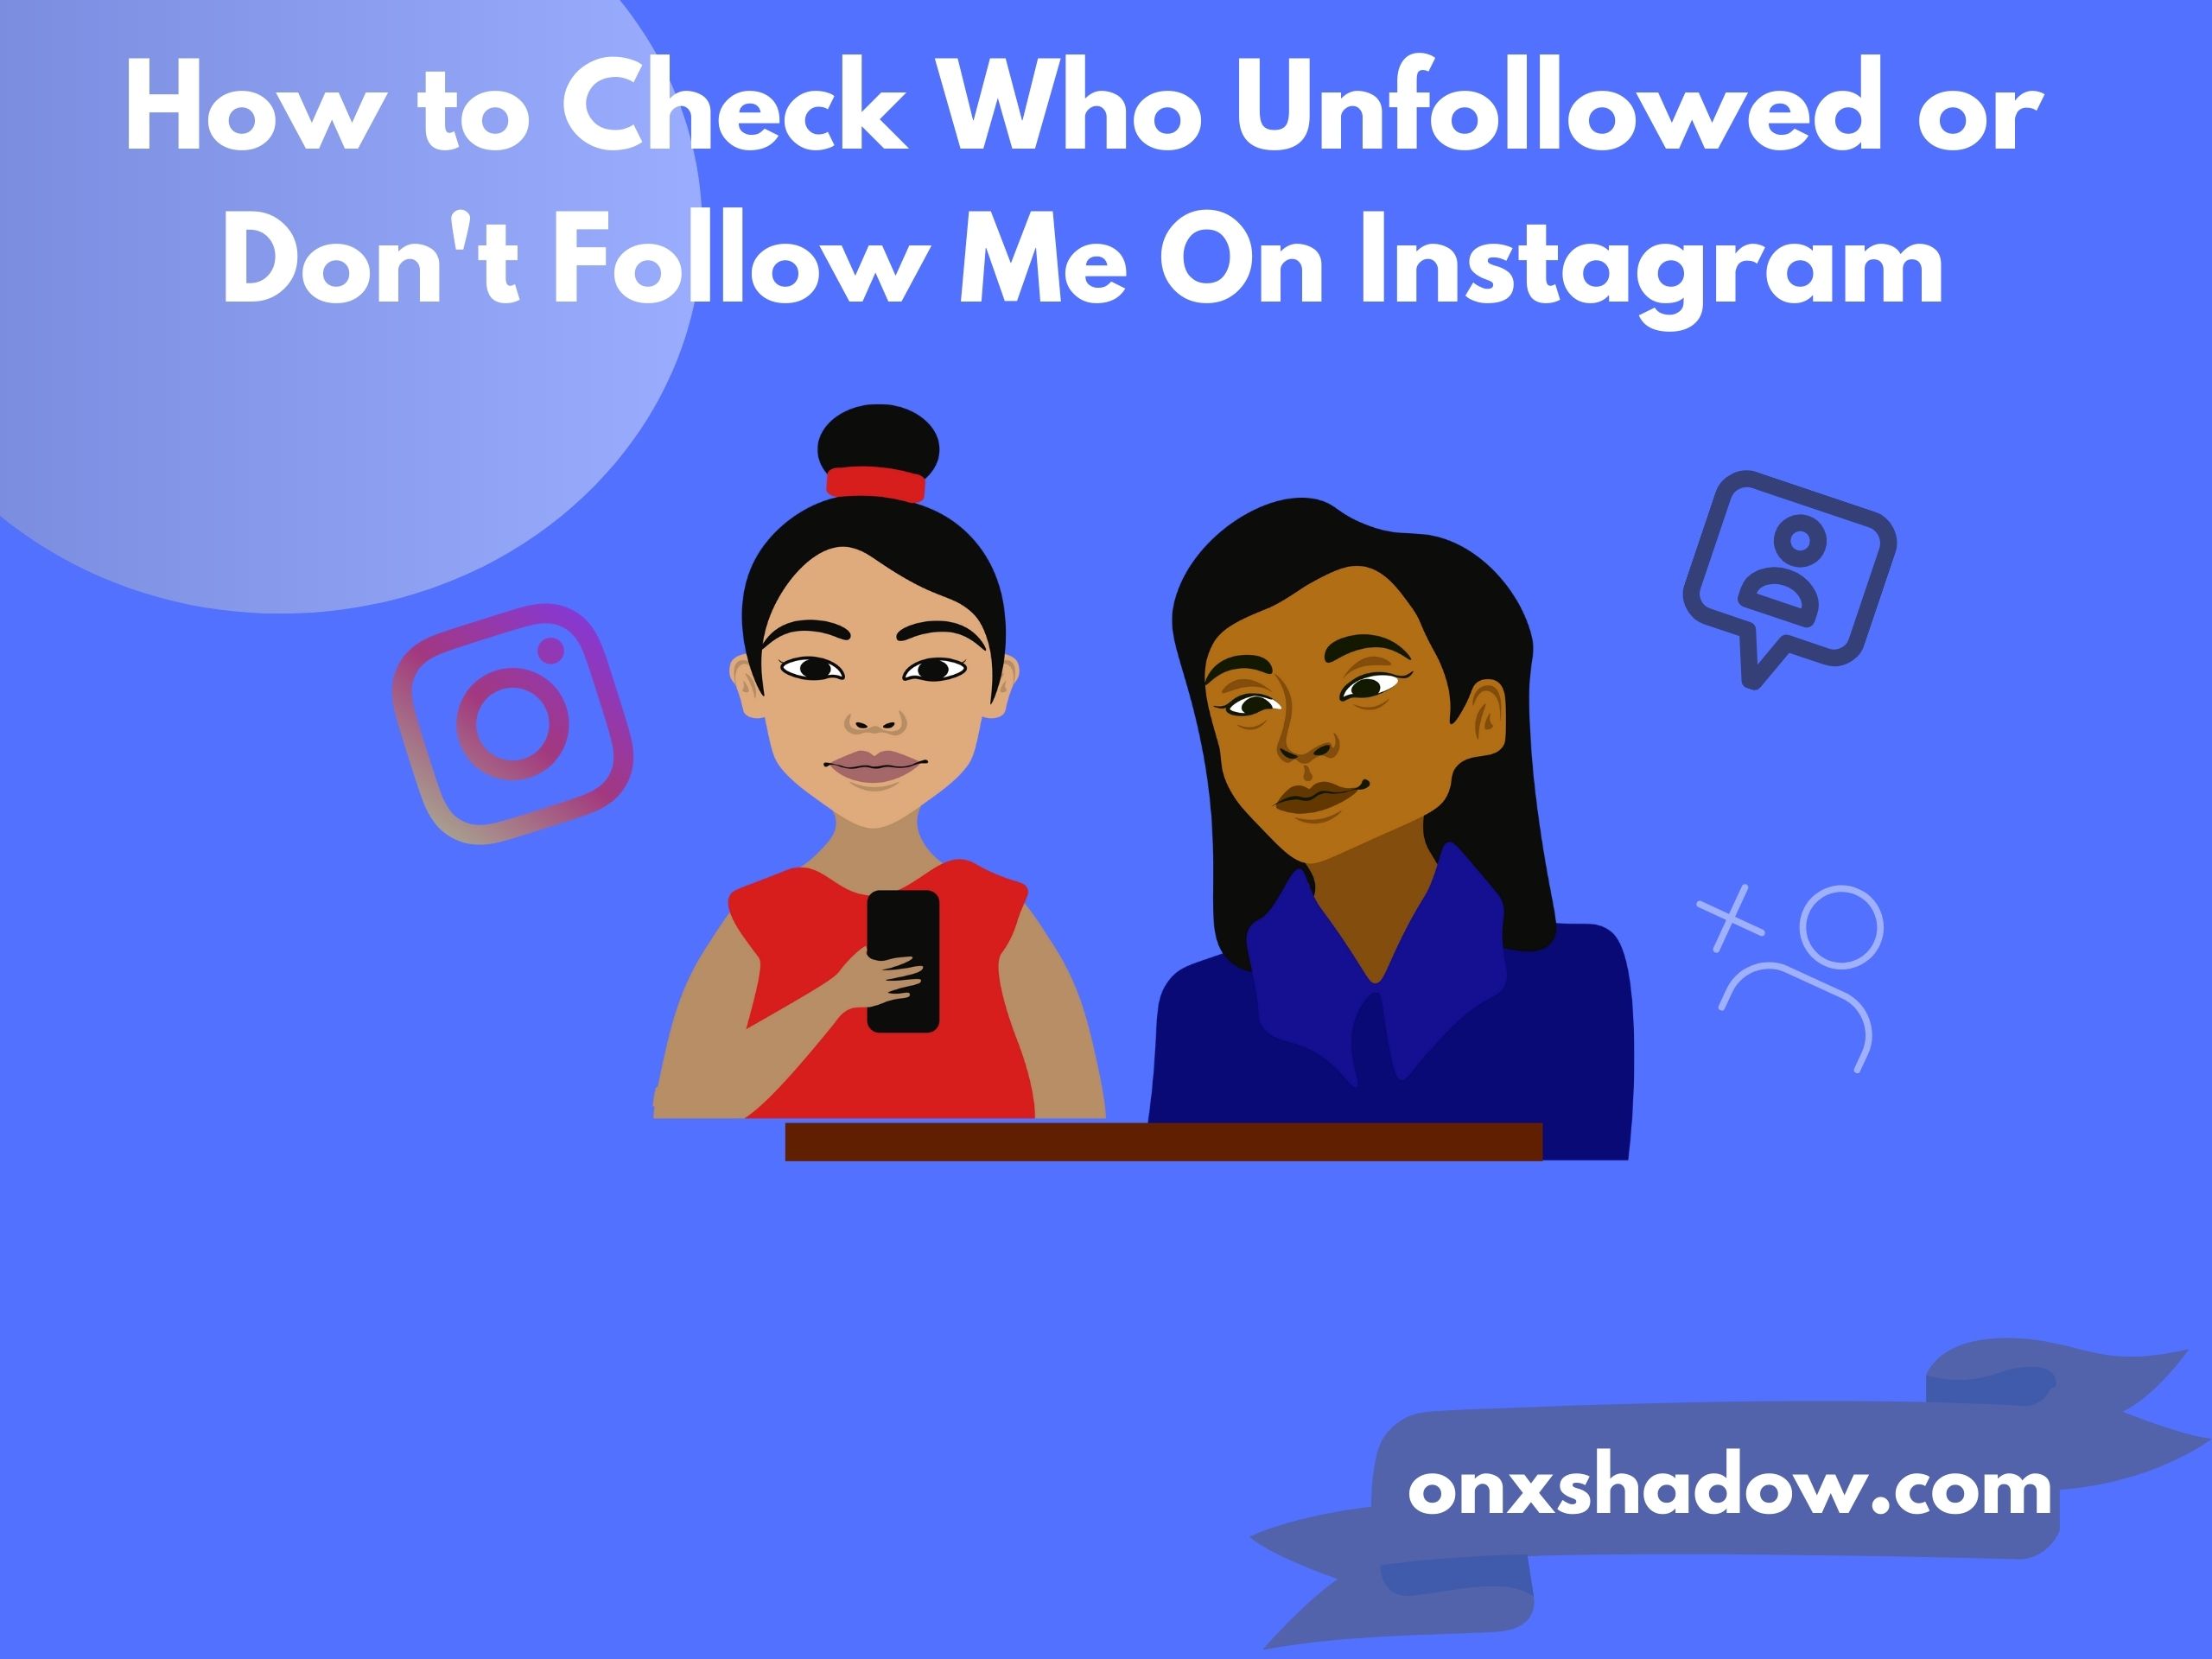 How to Check Who Unfollowed or Don't Follow Me On Instagram